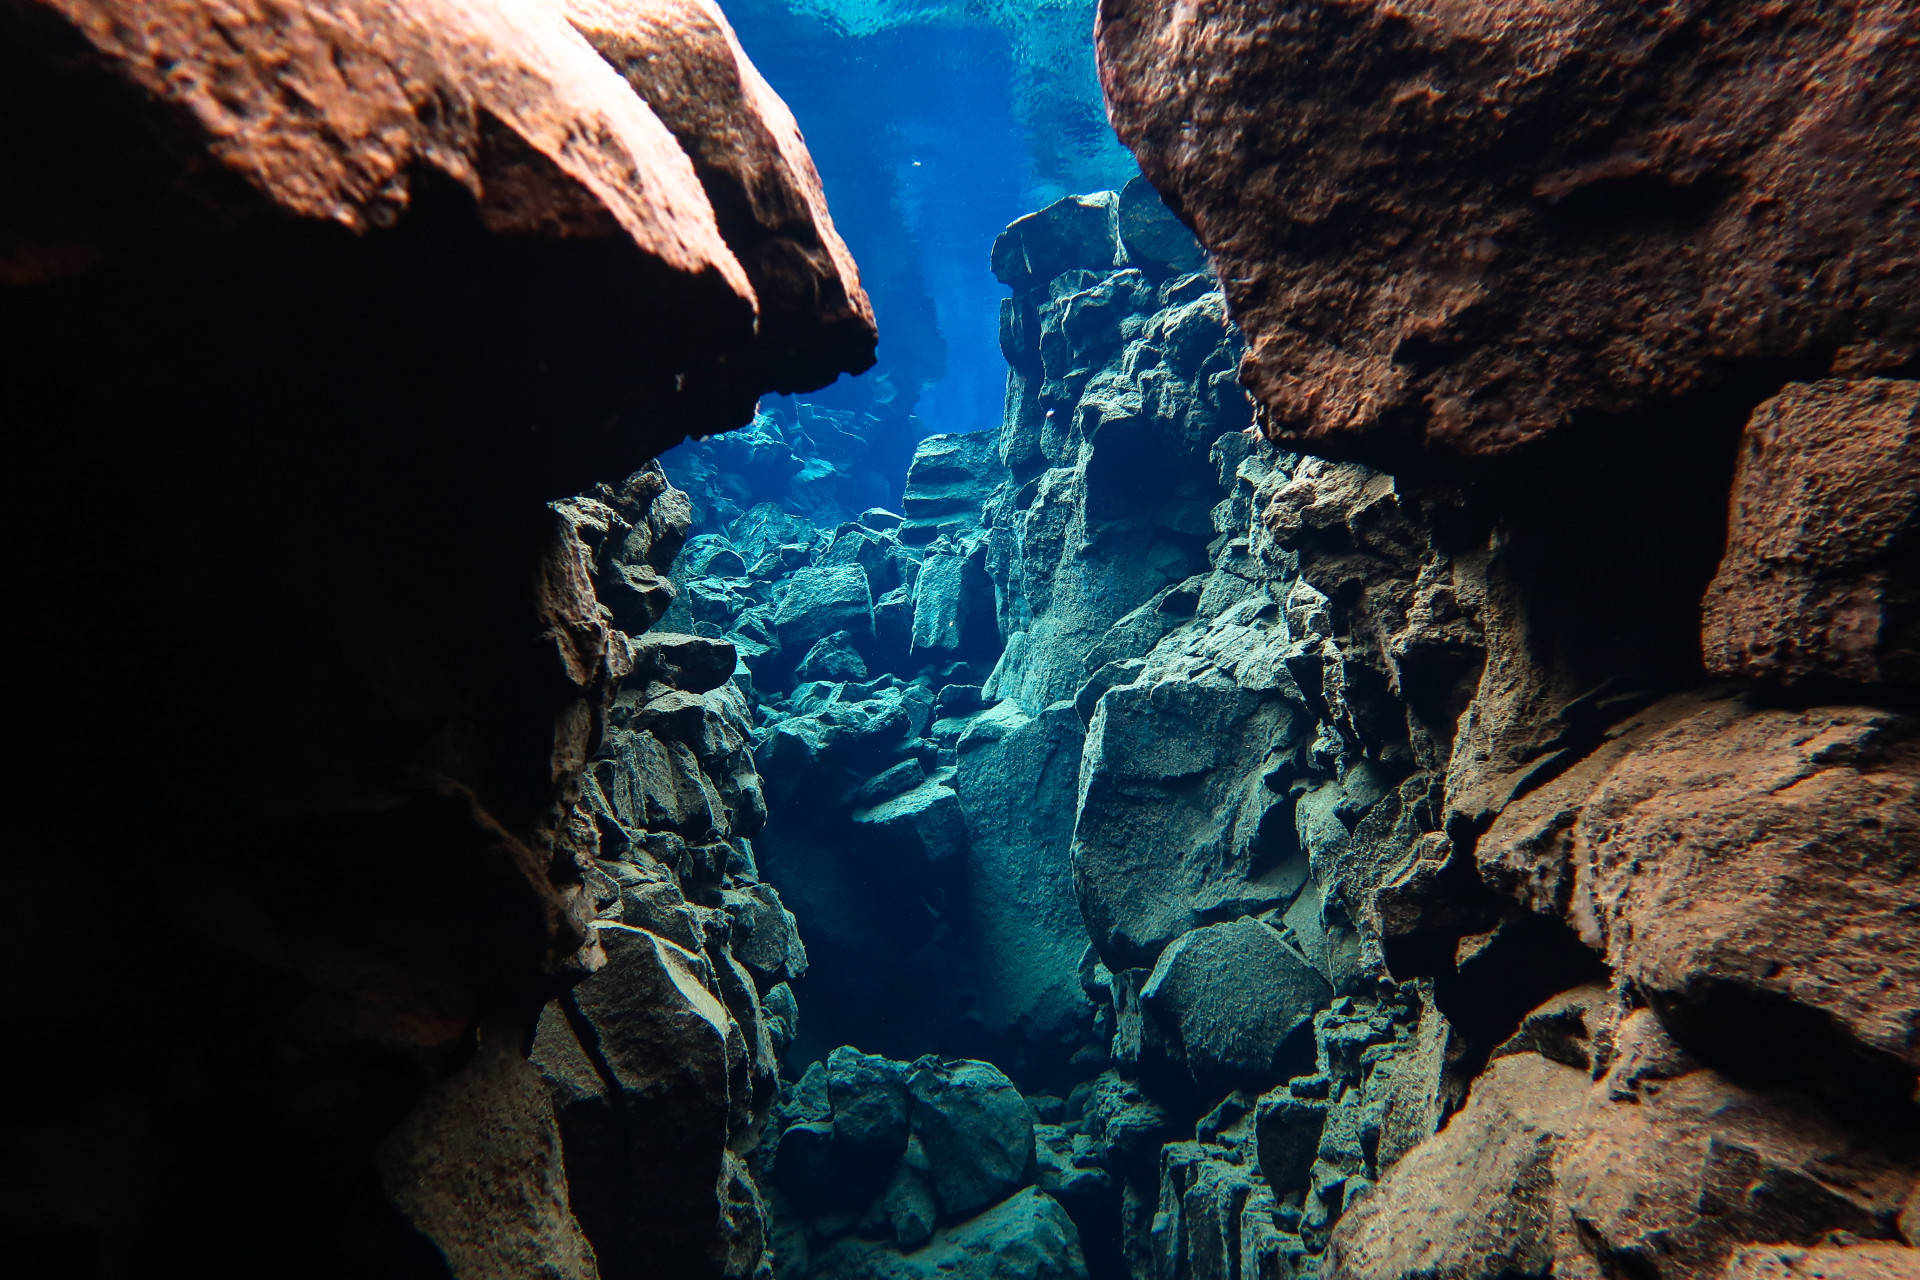 Divers seeking to swim between two continental plates need look no further than the Þingvallavatn Lake, located in the Þingvellir National Park.<p>You may also like:<a href="https://www.starsinsider.com/n/477391?utm_source=msn.com&utm_medium=display&utm_campaign=referral_description&utm_content=363990v15en-sg"> The forgotten art of the blacksmith</a></p>